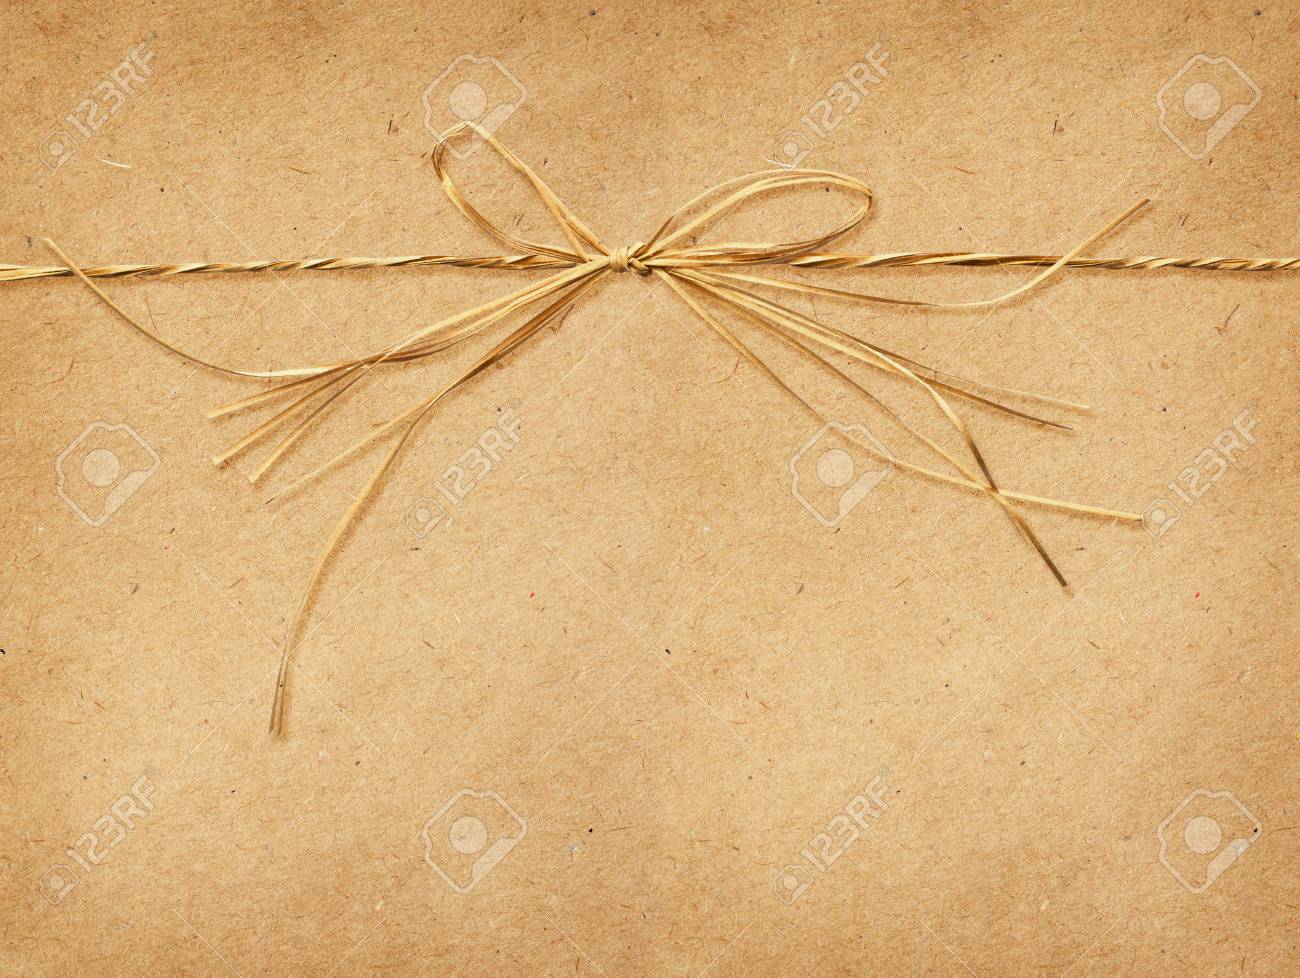 Beige Raffia Bow Tied On Craft Paper Background Stock Photo